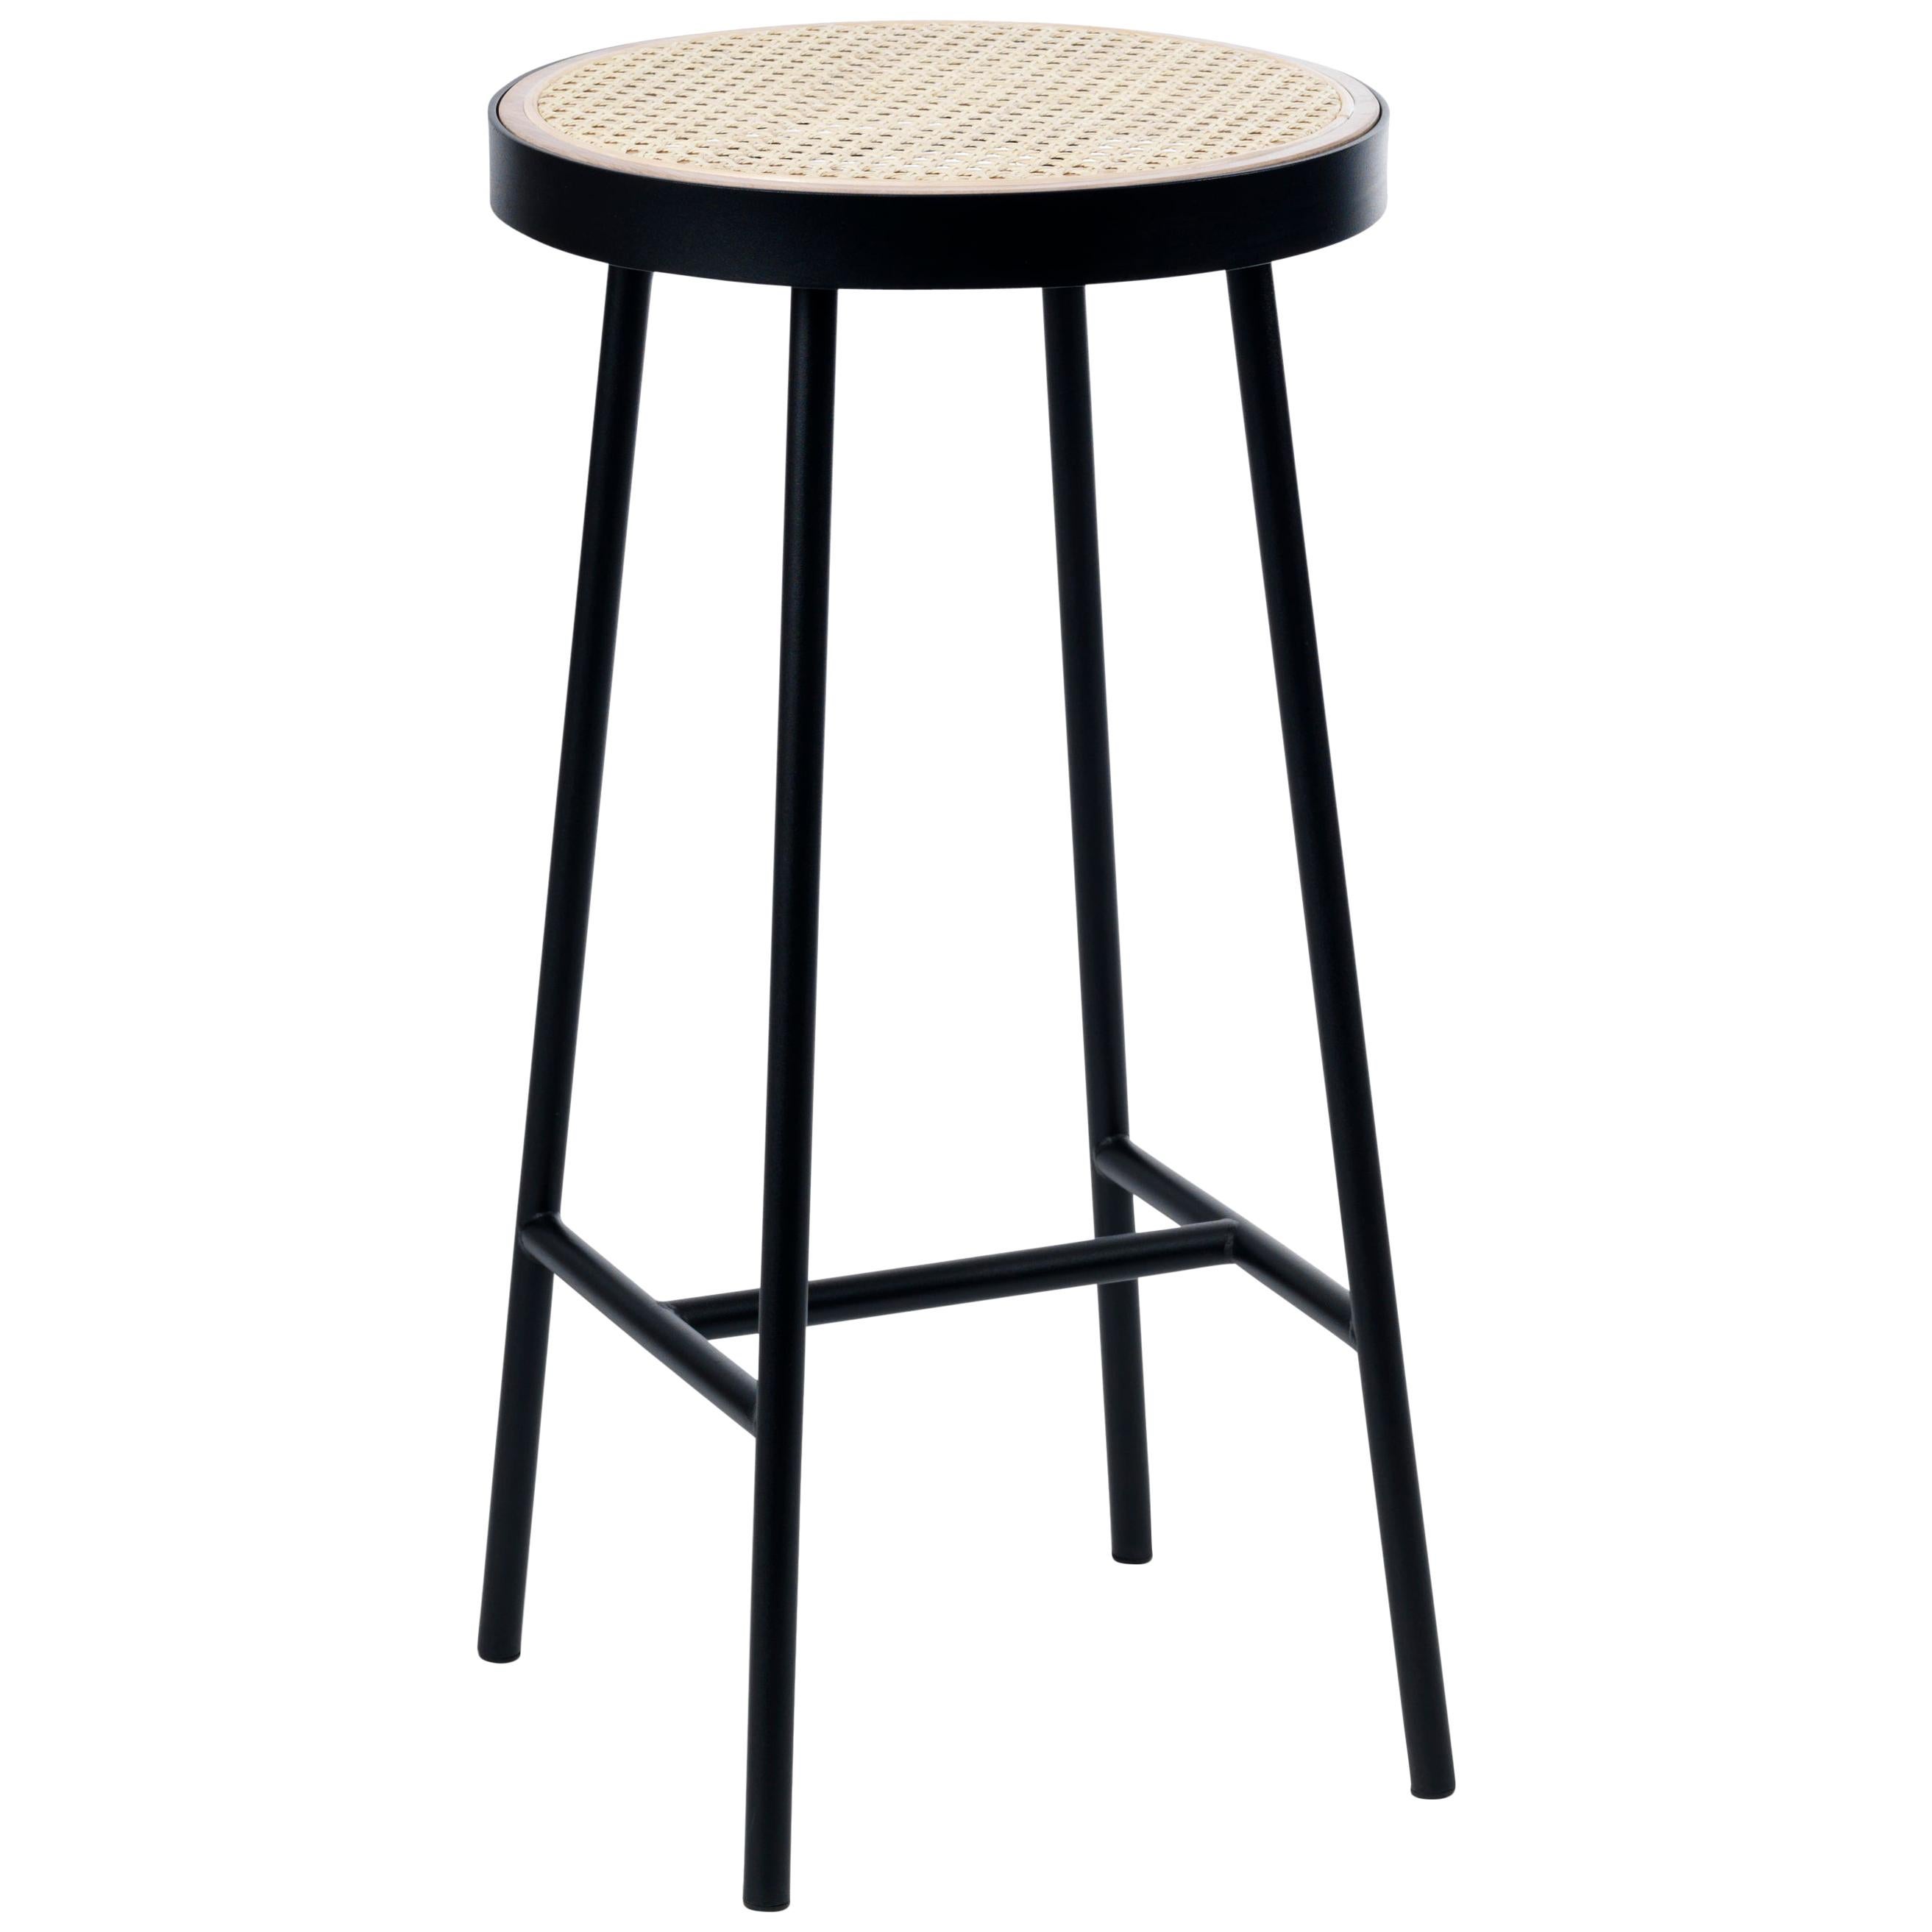 Be My Guest Cane Bar Stool by Charlotte Høncke for Warm Nordic For Sale